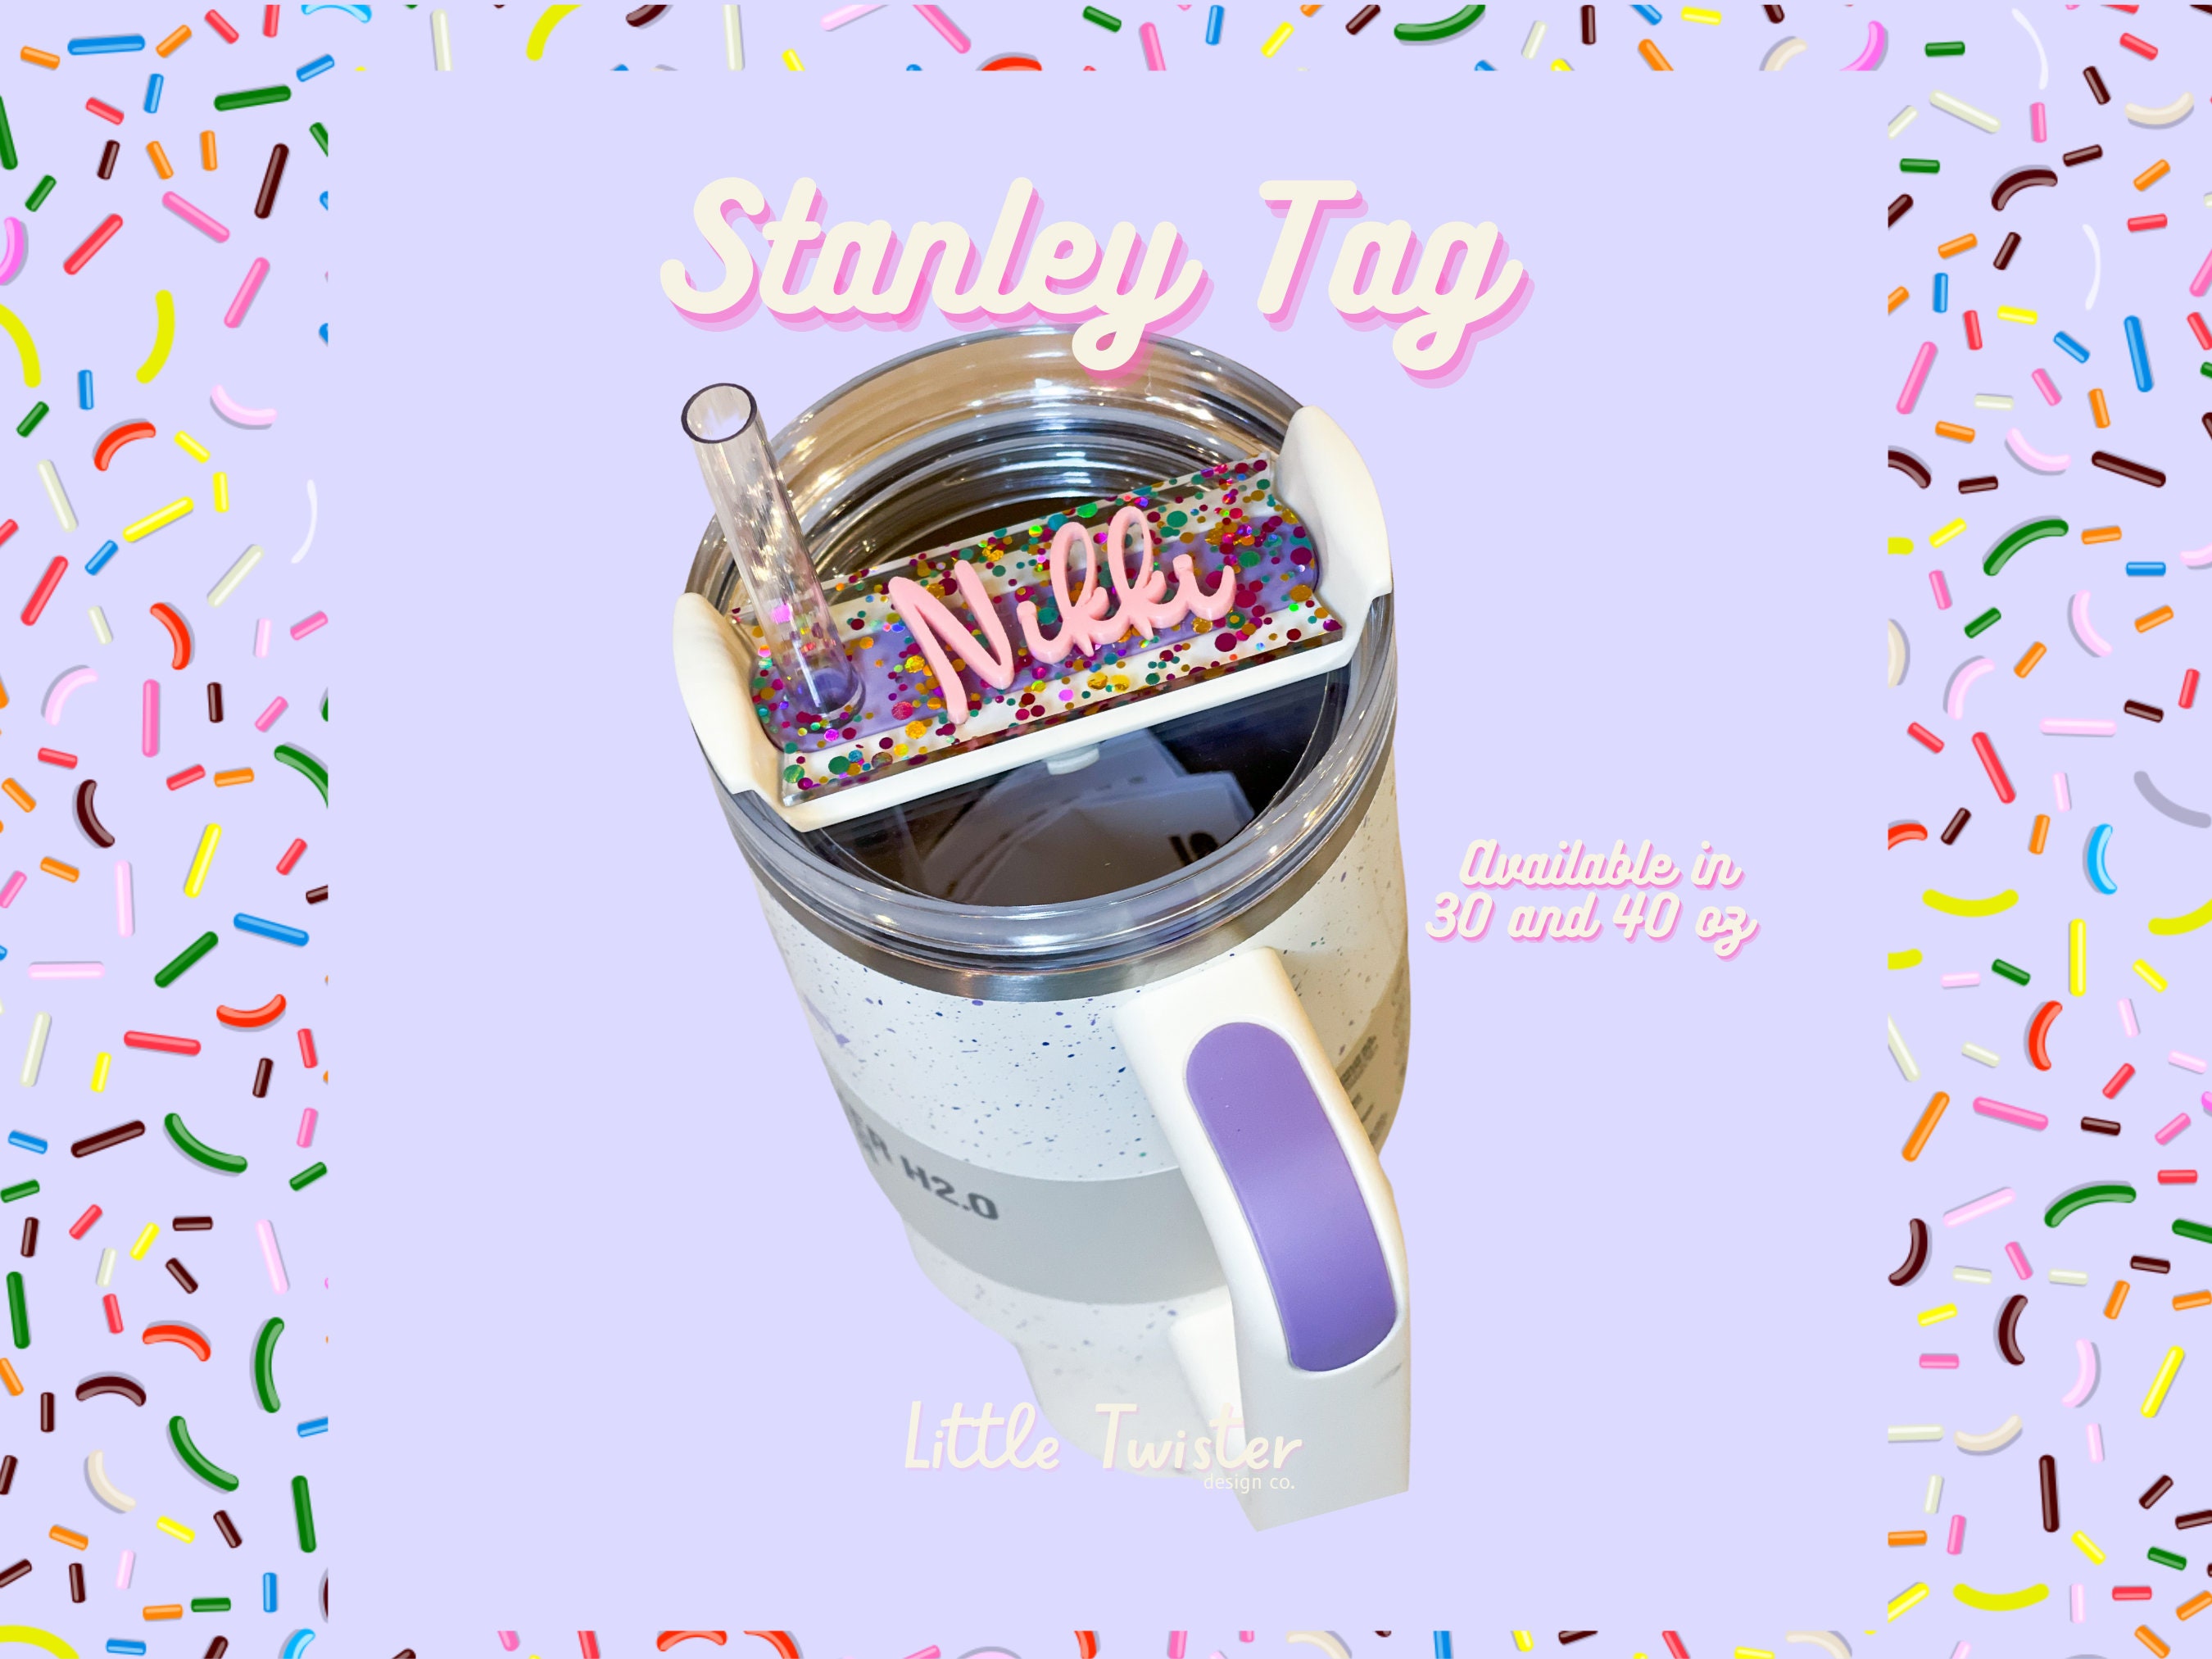 Bling Stanley tumbler - pool - baby blue - light blue premium rhinestones  40 oz cup with handle - HTF cup - free shipping! Tik Tok cup